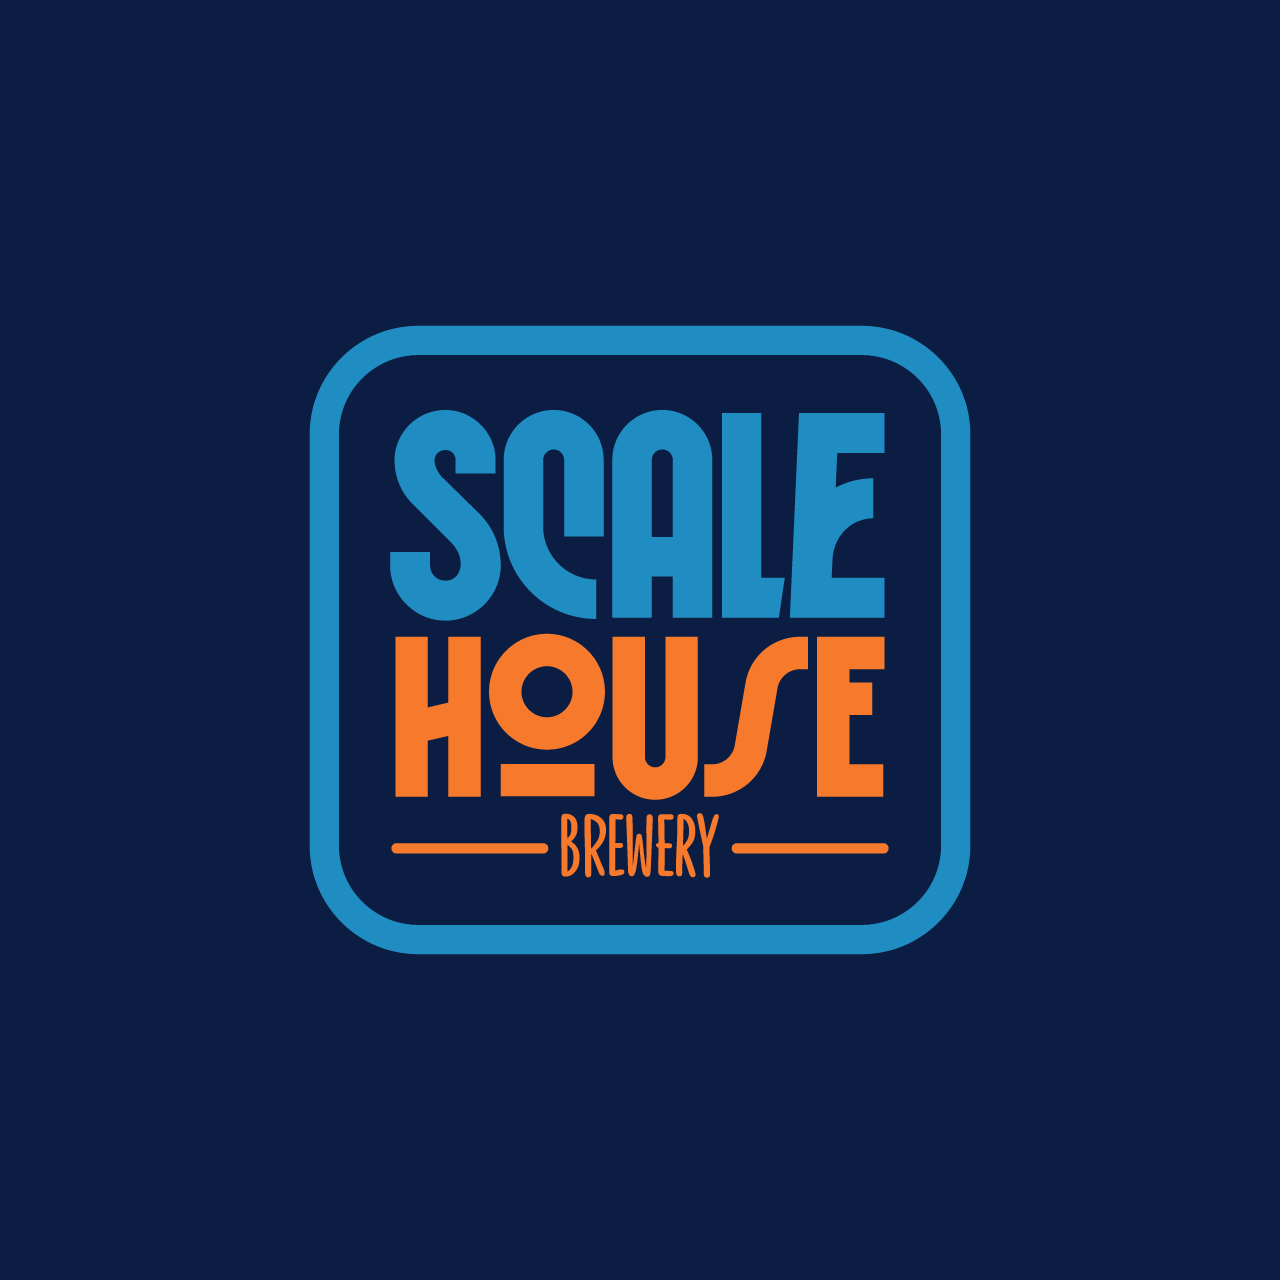 scale-house-brewery